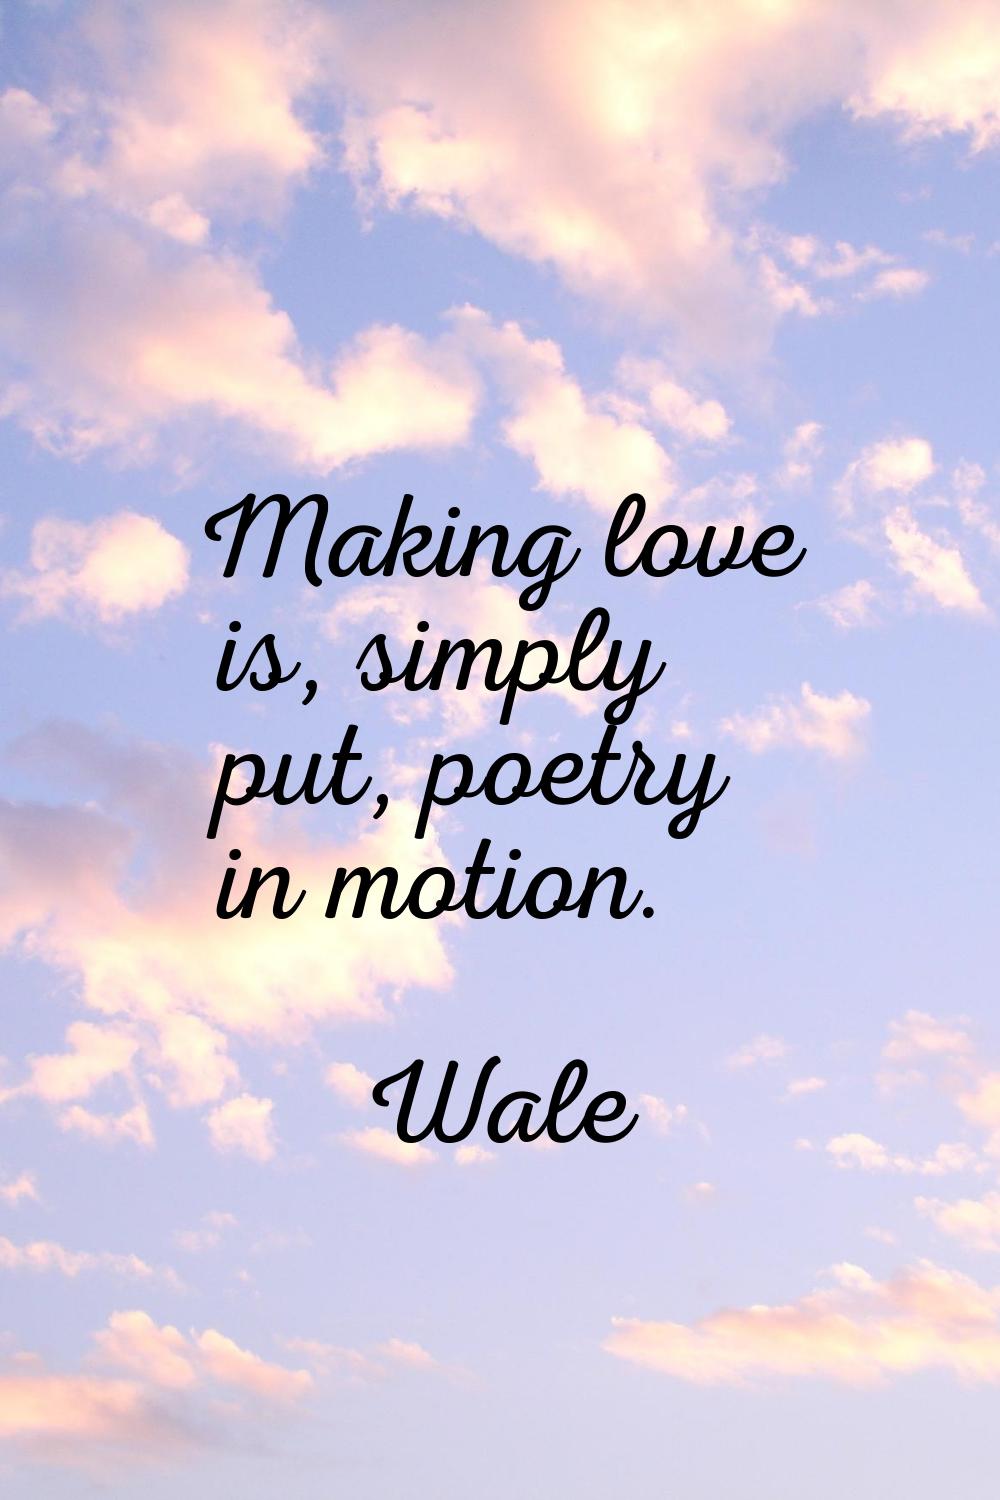 Making love is, simply put, poetry in motion.